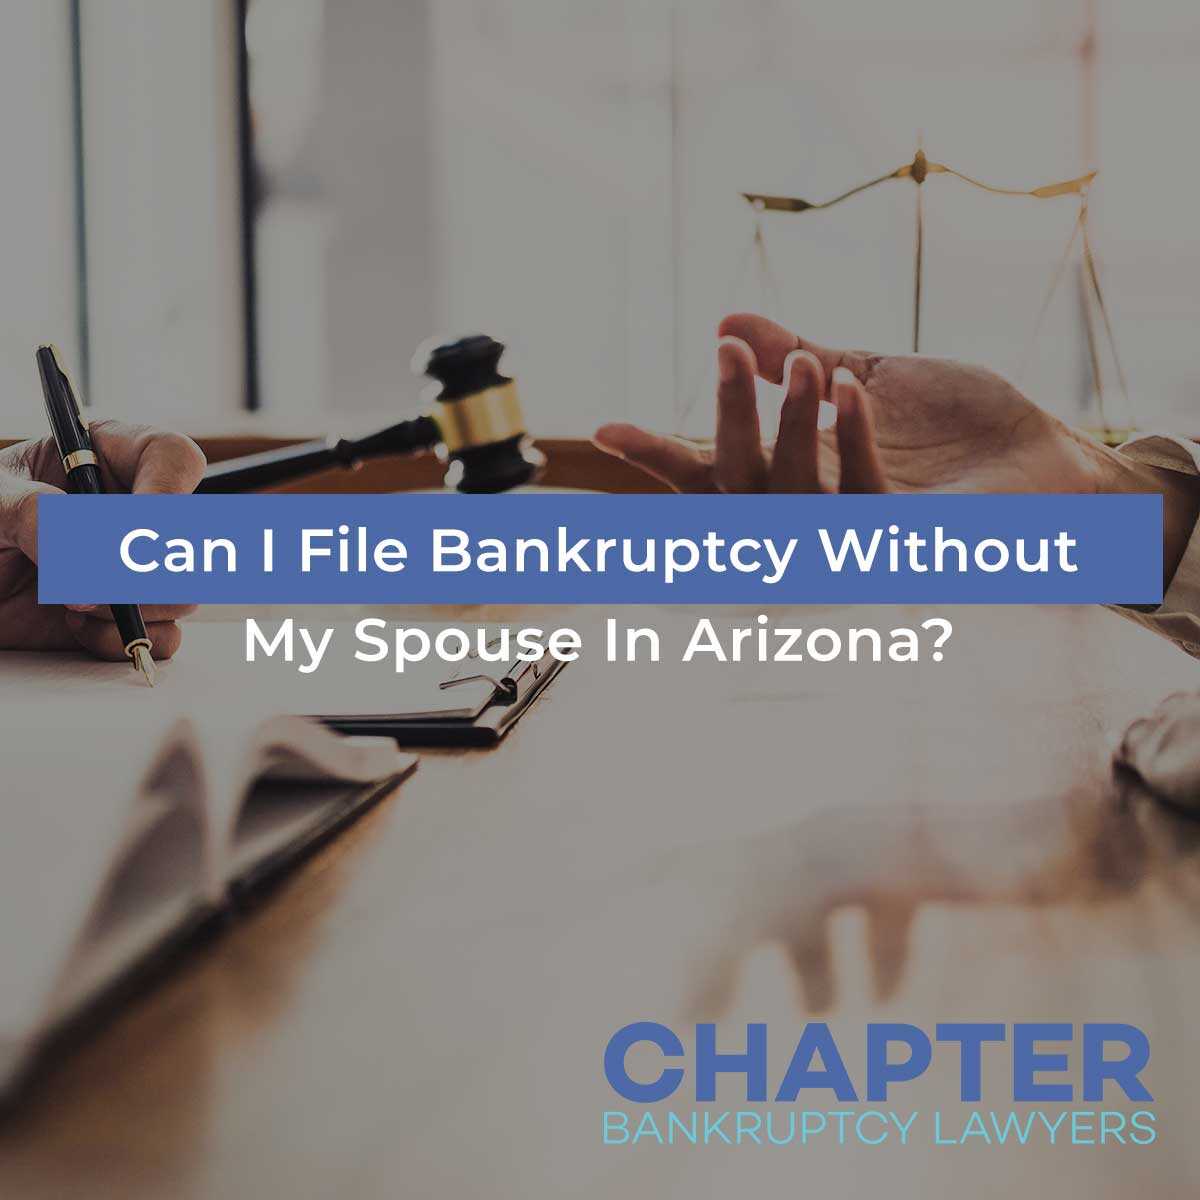 Can I File Bankruptcy Without My Spouse In Arizona?